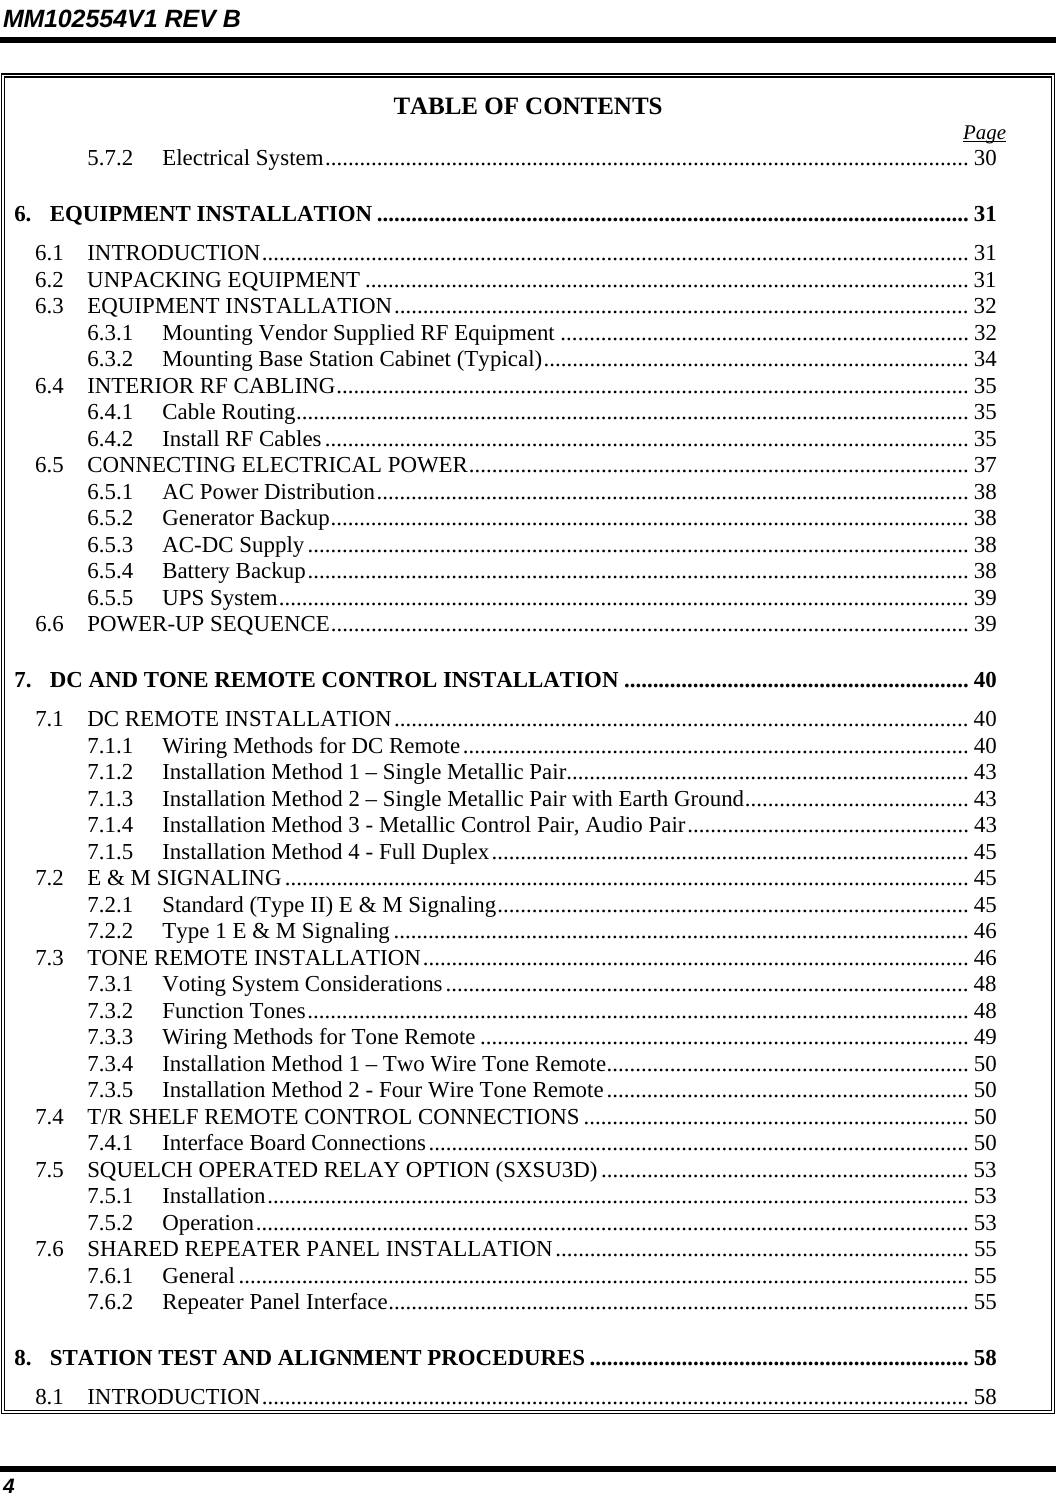 MM102554V1 REV B 4   TABLE OF CONTENTS  Page 5.7.2 Electrical System................................................................................................................ 30 6. EQUIPMENT INSTALLATION ....................................................................................................... 31 6.1 INTRODUCTION........................................................................................................................... 31 6.2 UNPACKING EQUIPMENT ......................................................................................................... 31 6.3 EQUIPMENT INSTALLATION.................................................................................................... 32 6.3.1  Mounting Vendor Supplied RF Equipment ....................................................................... 32 6.3.2  Mounting Base Station Cabinet (Typical).......................................................................... 34 6.4 INTERIOR RF CABLING.............................................................................................................. 35 6.4.1 Cable Routing..................................................................................................................... 35 6.4.2  Install RF Cables................................................................................................................ 35 6.5  CONNECTING ELECTRICAL POWER....................................................................................... 37 6.5.1  AC Power Distribution....................................................................................................... 38 6.5.2 Generator Backup............................................................................................................... 38 6.5.3 AC-DC Supply................................................................................................................... 38 6.5.4 Battery Backup................................................................................................................... 38 6.5.5 UPS System........................................................................................................................ 39 6.6 POWER-UP SEQUENCE............................................................................................................... 39 7. DC AND TONE REMOTE CONTROL INSTALLATION ............................................................ 40 7.1  DC REMOTE INSTALLATION.................................................................................................... 40 7.1.1  Wiring Methods for DC Remote........................................................................................ 40 7.1.2  Installation Method 1 – Single Metallic Pair...................................................................... 43 7.1.3  Installation Method 2 – Single Metallic Pair with Earth Ground....................................... 43 7.1.4  Installation Method 3 - Metallic Control Pair, Audio Pair................................................. 43 7.1.5  Installation Method 4 - Full Duplex................................................................................... 45 7.2  E &amp; M SIGNALING....................................................................................................................... 45 7.2.1  Standard (Type II) E &amp; M Signaling.................................................................................. 45 7.2.2  Type 1 E &amp; M Signaling .................................................................................................... 46 7.3  TONE REMOTE INSTALLATION............................................................................................... 46 7.3.1  Voting System Considerations........................................................................................... 48 7.3.2 Function Tones................................................................................................................... 48 7.3.3  Wiring Methods for Tone Remote ..................................................................................... 49 7.3.4  Installation Method 1 – Two Wire Tone Remote............................................................... 50 7.3.5  Installation Method 2 - Four Wire Tone Remote............................................................... 50 7.4  T/R SHELF REMOTE CONTROL CONNECTIONS ................................................................... 50 7.4.1  Interface Board Connections.............................................................................................. 50 7.5  SQUELCH OPERATED RELAY OPTION (SXSU3D)................................................................ 53 7.5.1 Installation.......................................................................................................................... 53 7.5.2 Operation............................................................................................................................ 53 7.6  SHARED REPEATER PANEL INSTALLATION........................................................................ 55 7.6.1 General ............................................................................................................................... 55 7.6.2  Repeater Panel Interface..................................................................................................... 55 8. STATION TEST AND ALIGNMENT PROCEDURES .................................................................. 58 8.1 INTRODUCTION........................................................................................................................... 58 